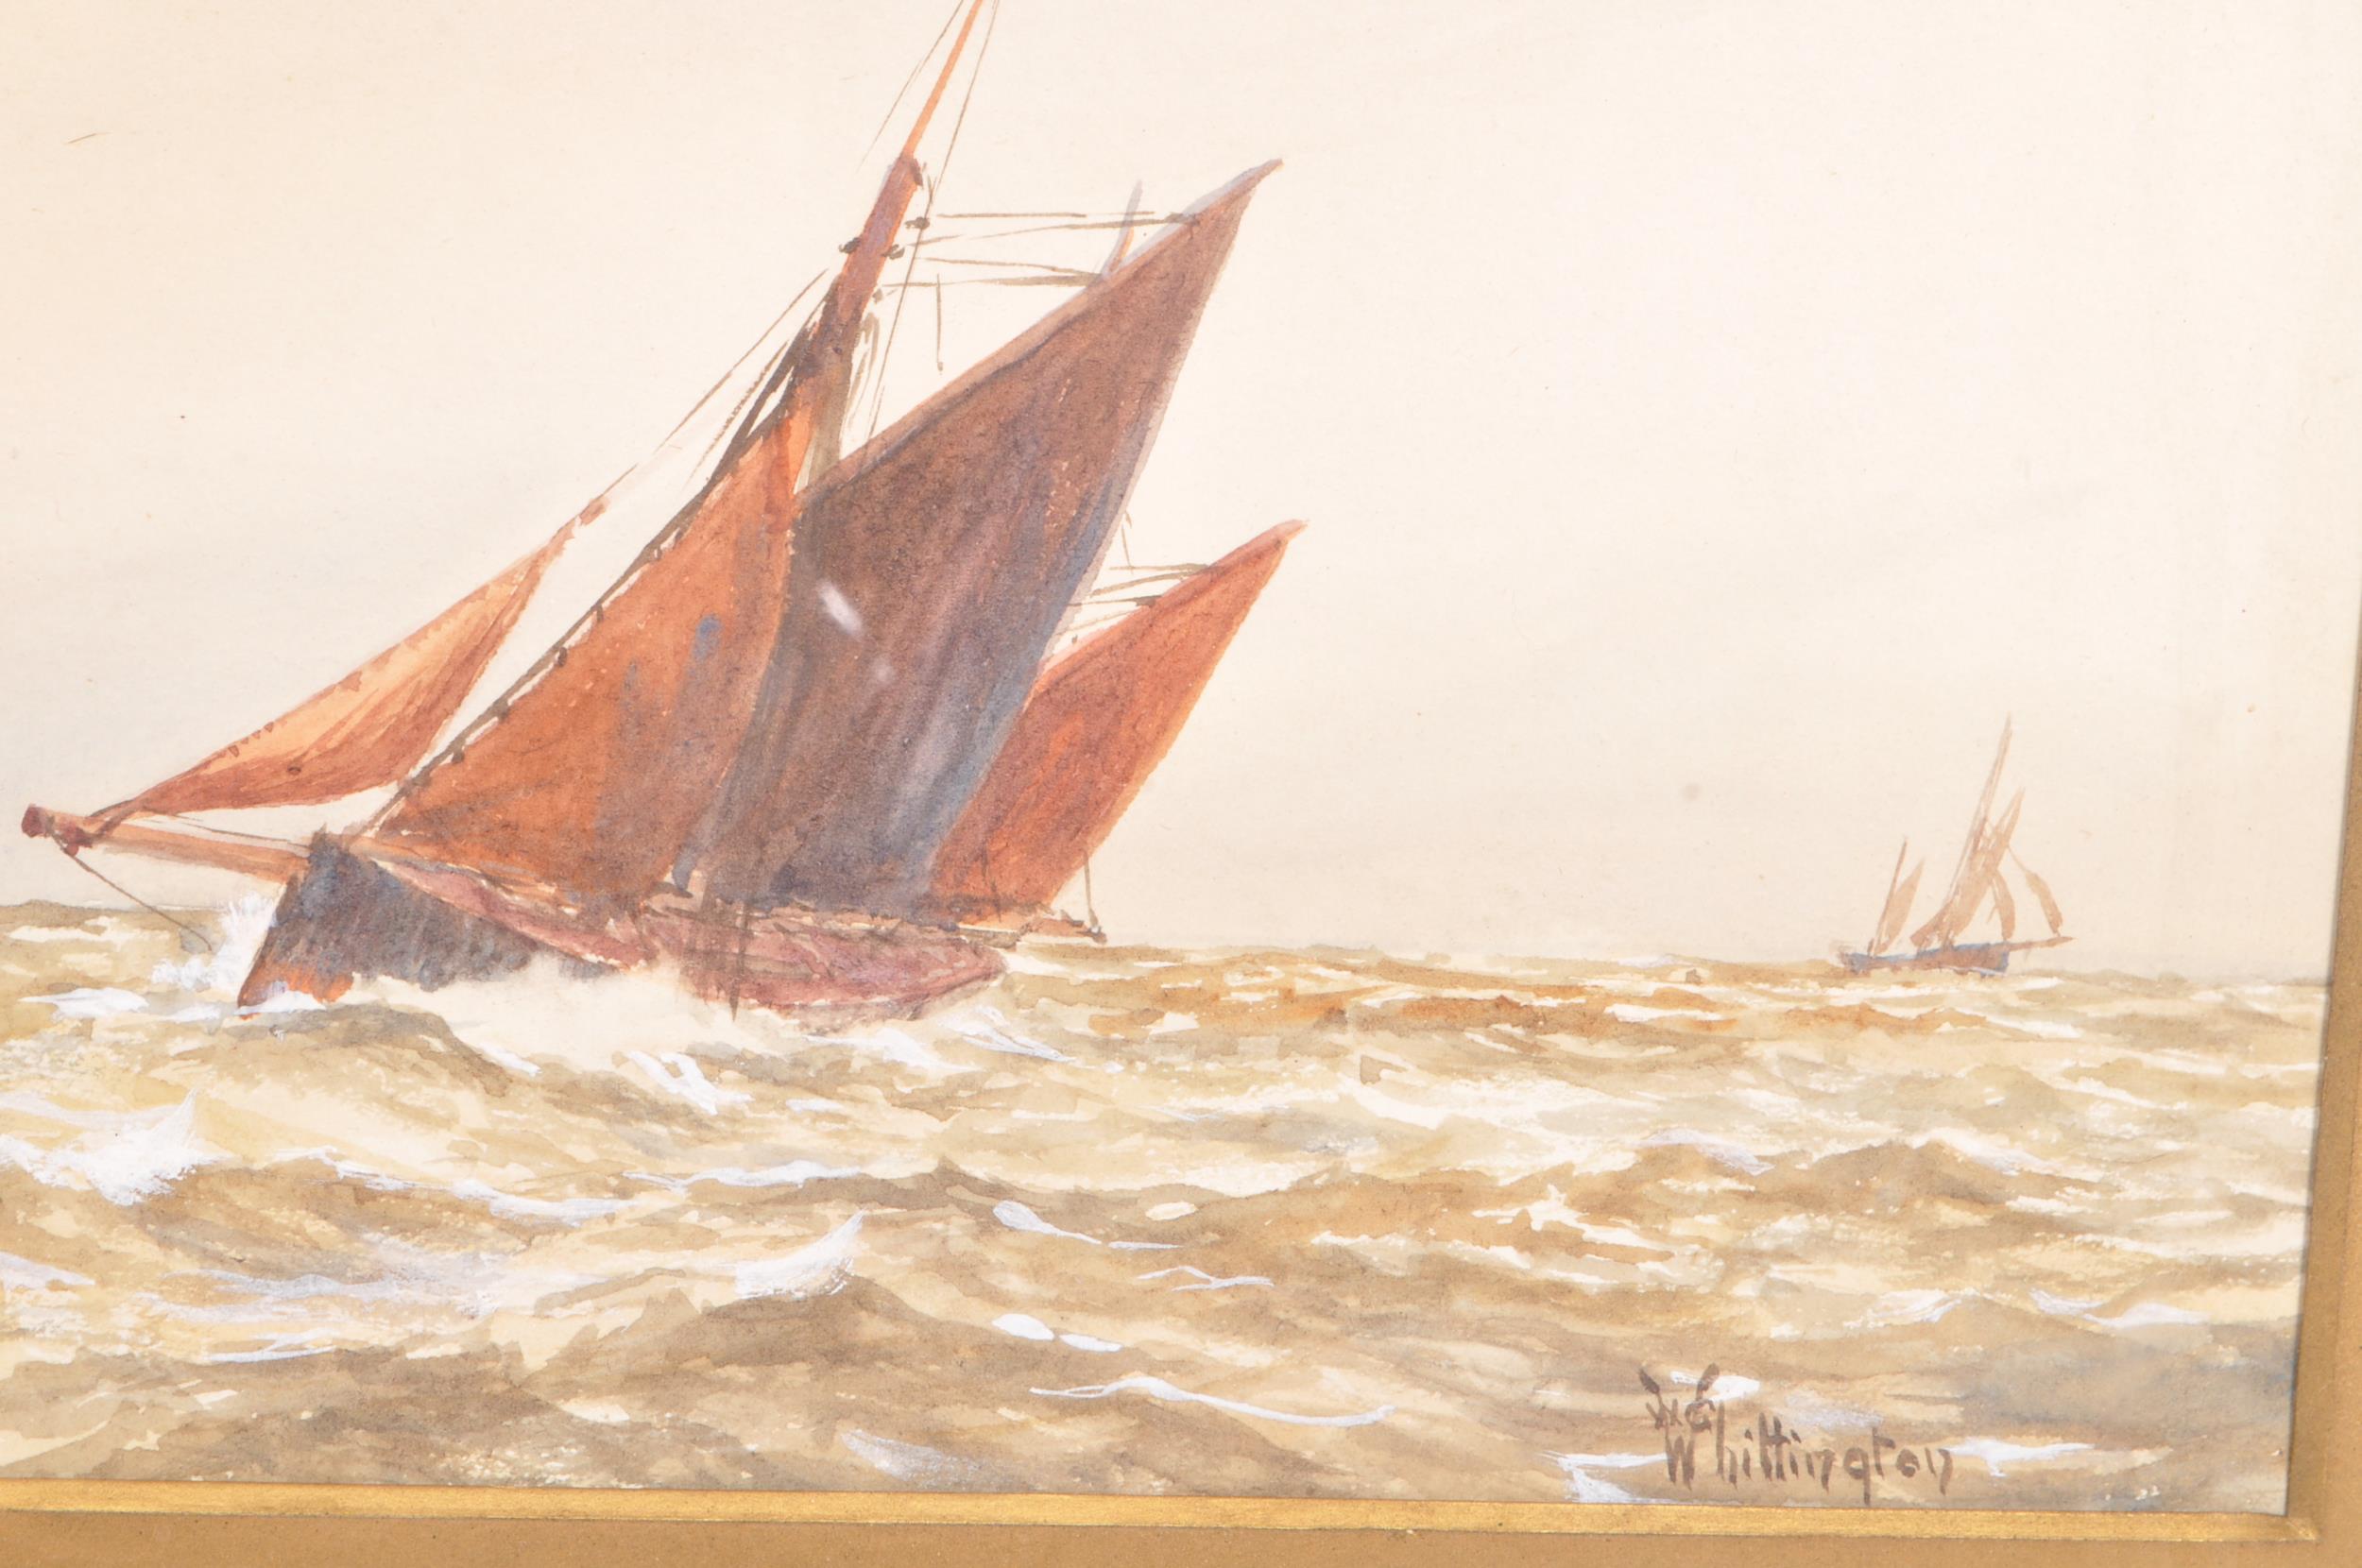 TWO 19TH MARITIME SAILING BOAT SCENES BY WG WHITTINGTON - Image 6 of 7